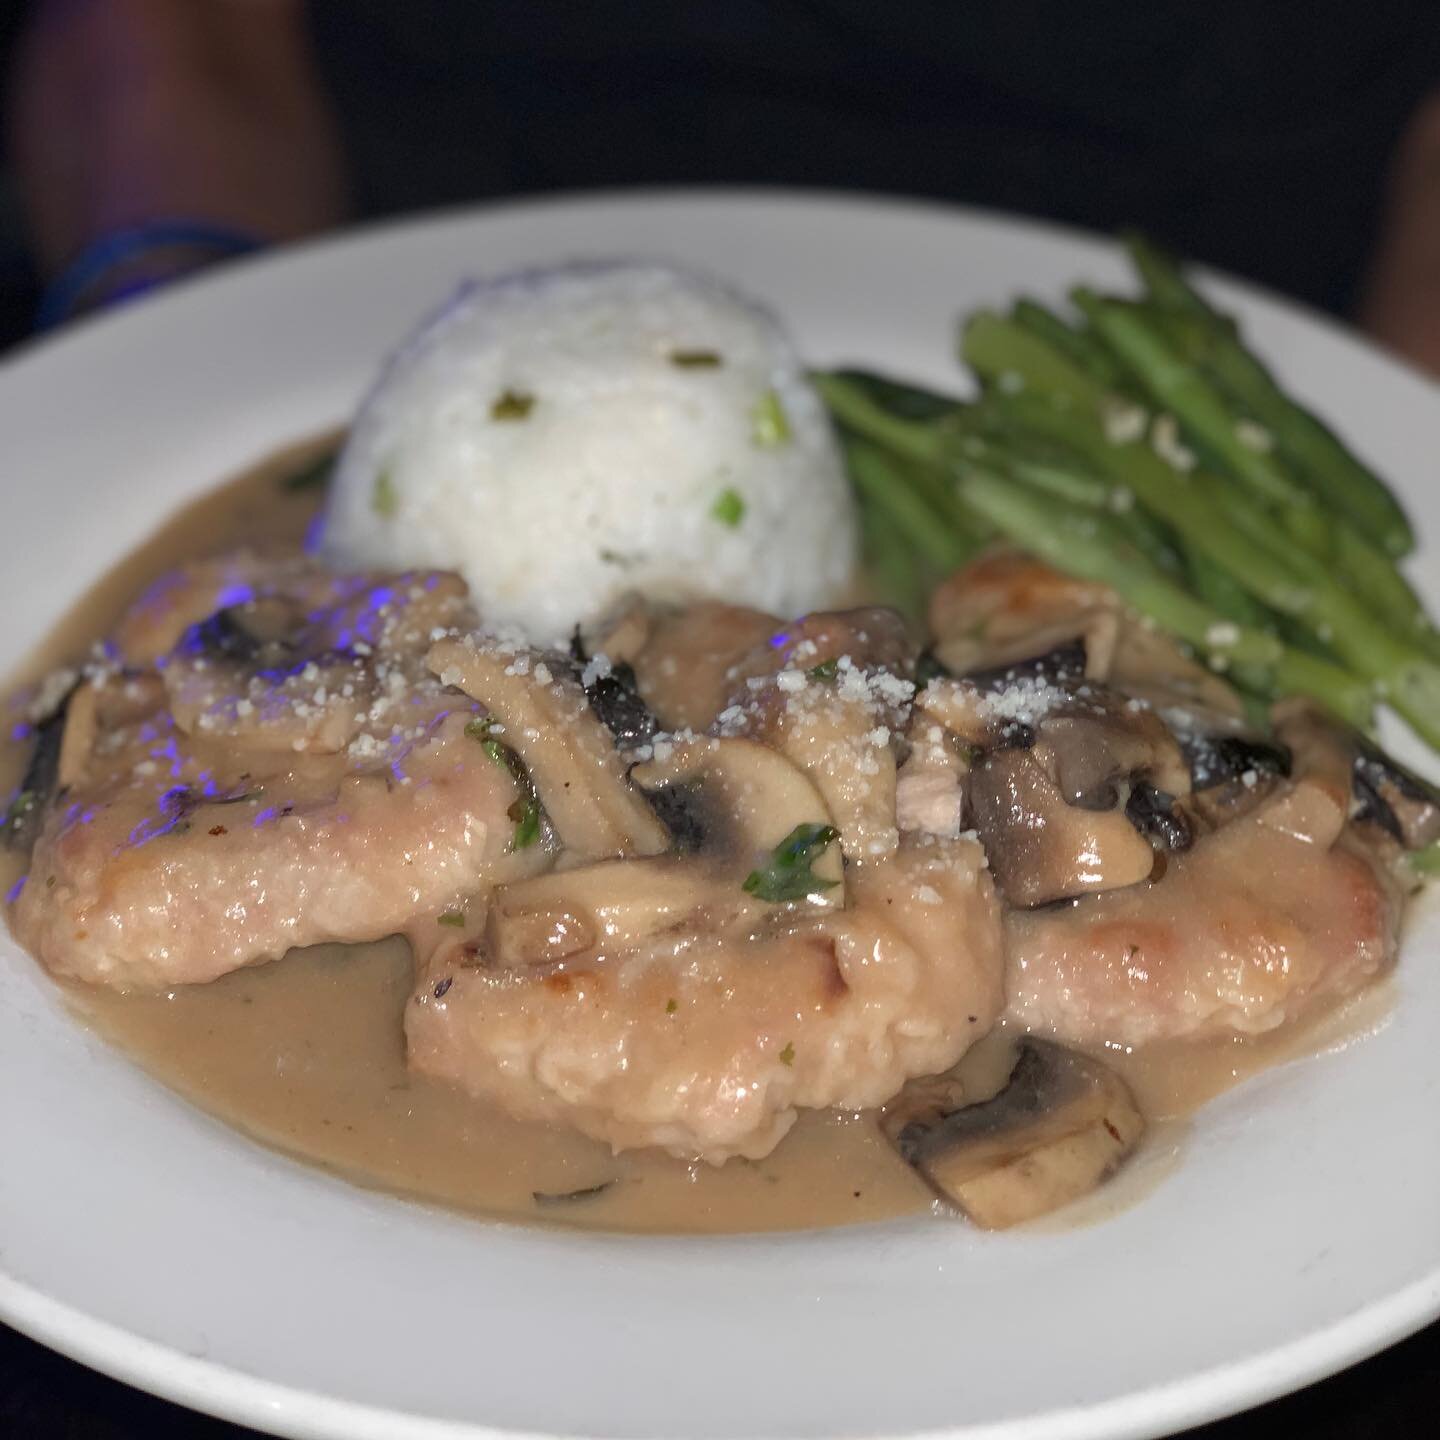 THIS WEEKS 1/2 TRAY SPECIALS:

Tue 4/7 -  Penne Bolognese $20  Whole Chicken cut into pieces with Scallion Rice $22  Chicken Marsala or Francaise $20

Wed 4/8 -  Creole Meatloaf choice of Mashed Potatoes or Mac n Cheese $25  Chicken Parmigiana w/Ling